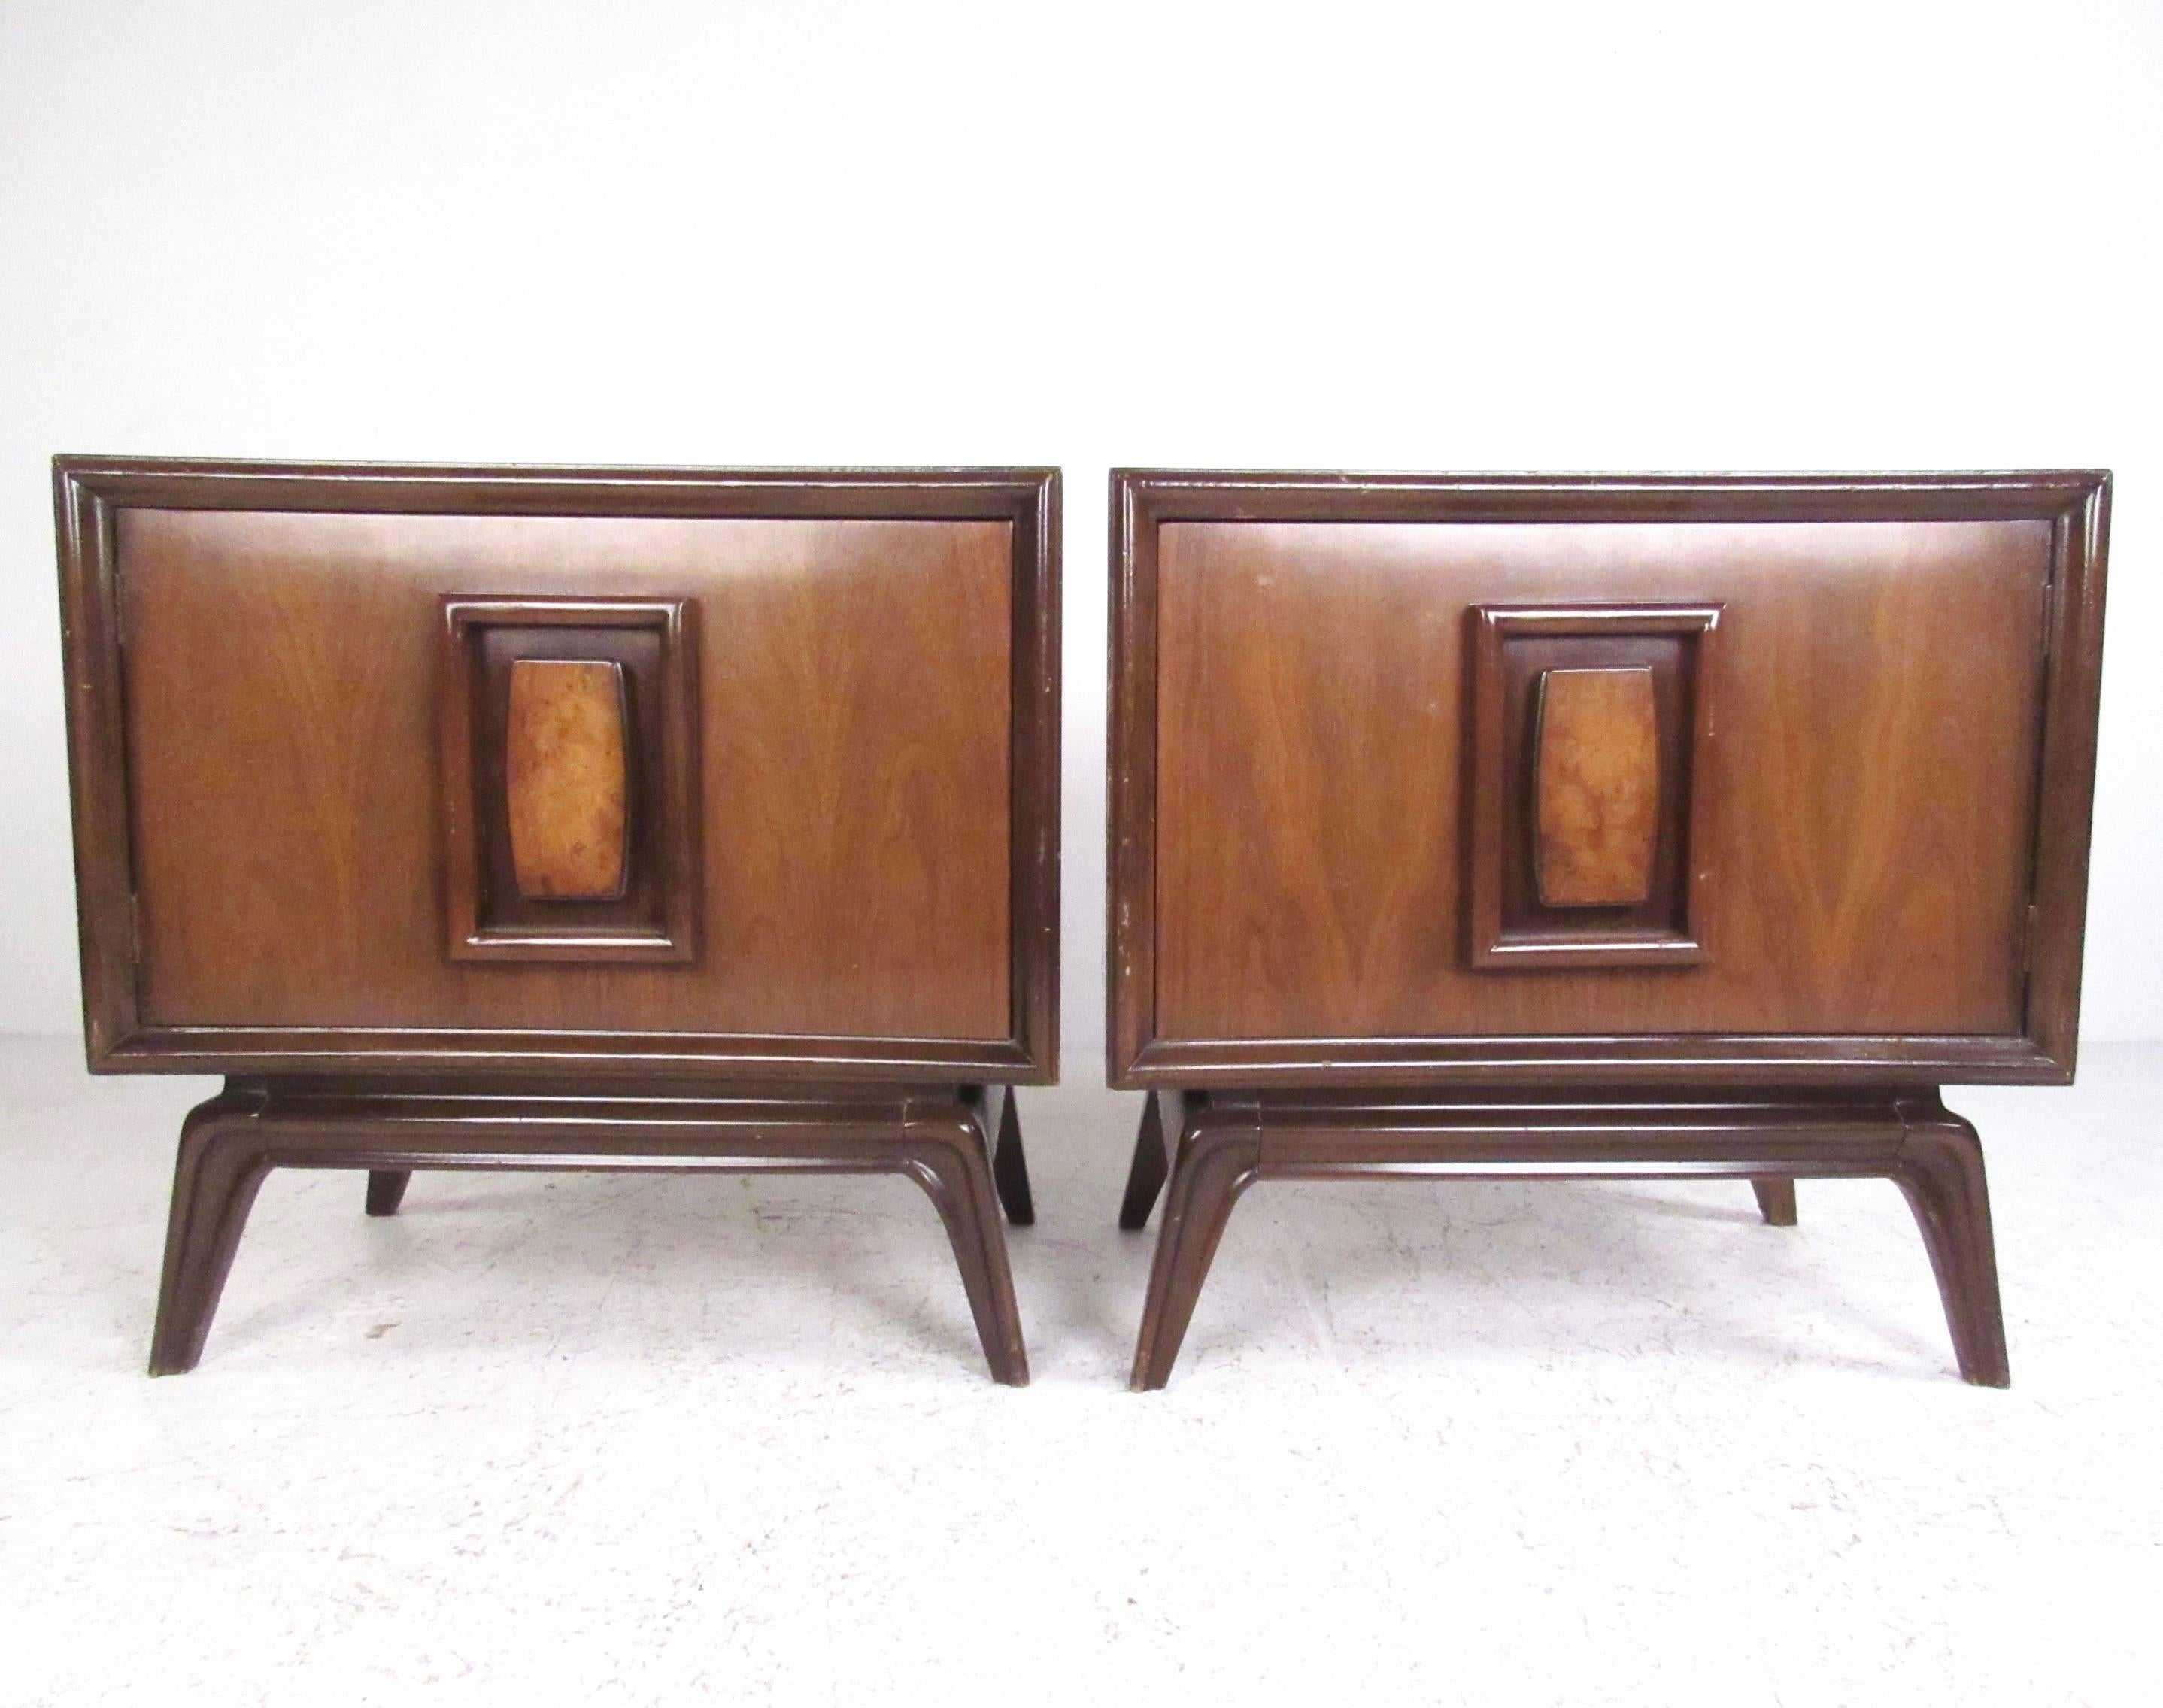 This pair of sculpted front American walnut end tables feature rich walnut finish with unique decorative detail. Tapered legs, spacious shelved storage, and Mid-Century Modern style make this matching pair an impressive addition to bedroom or living